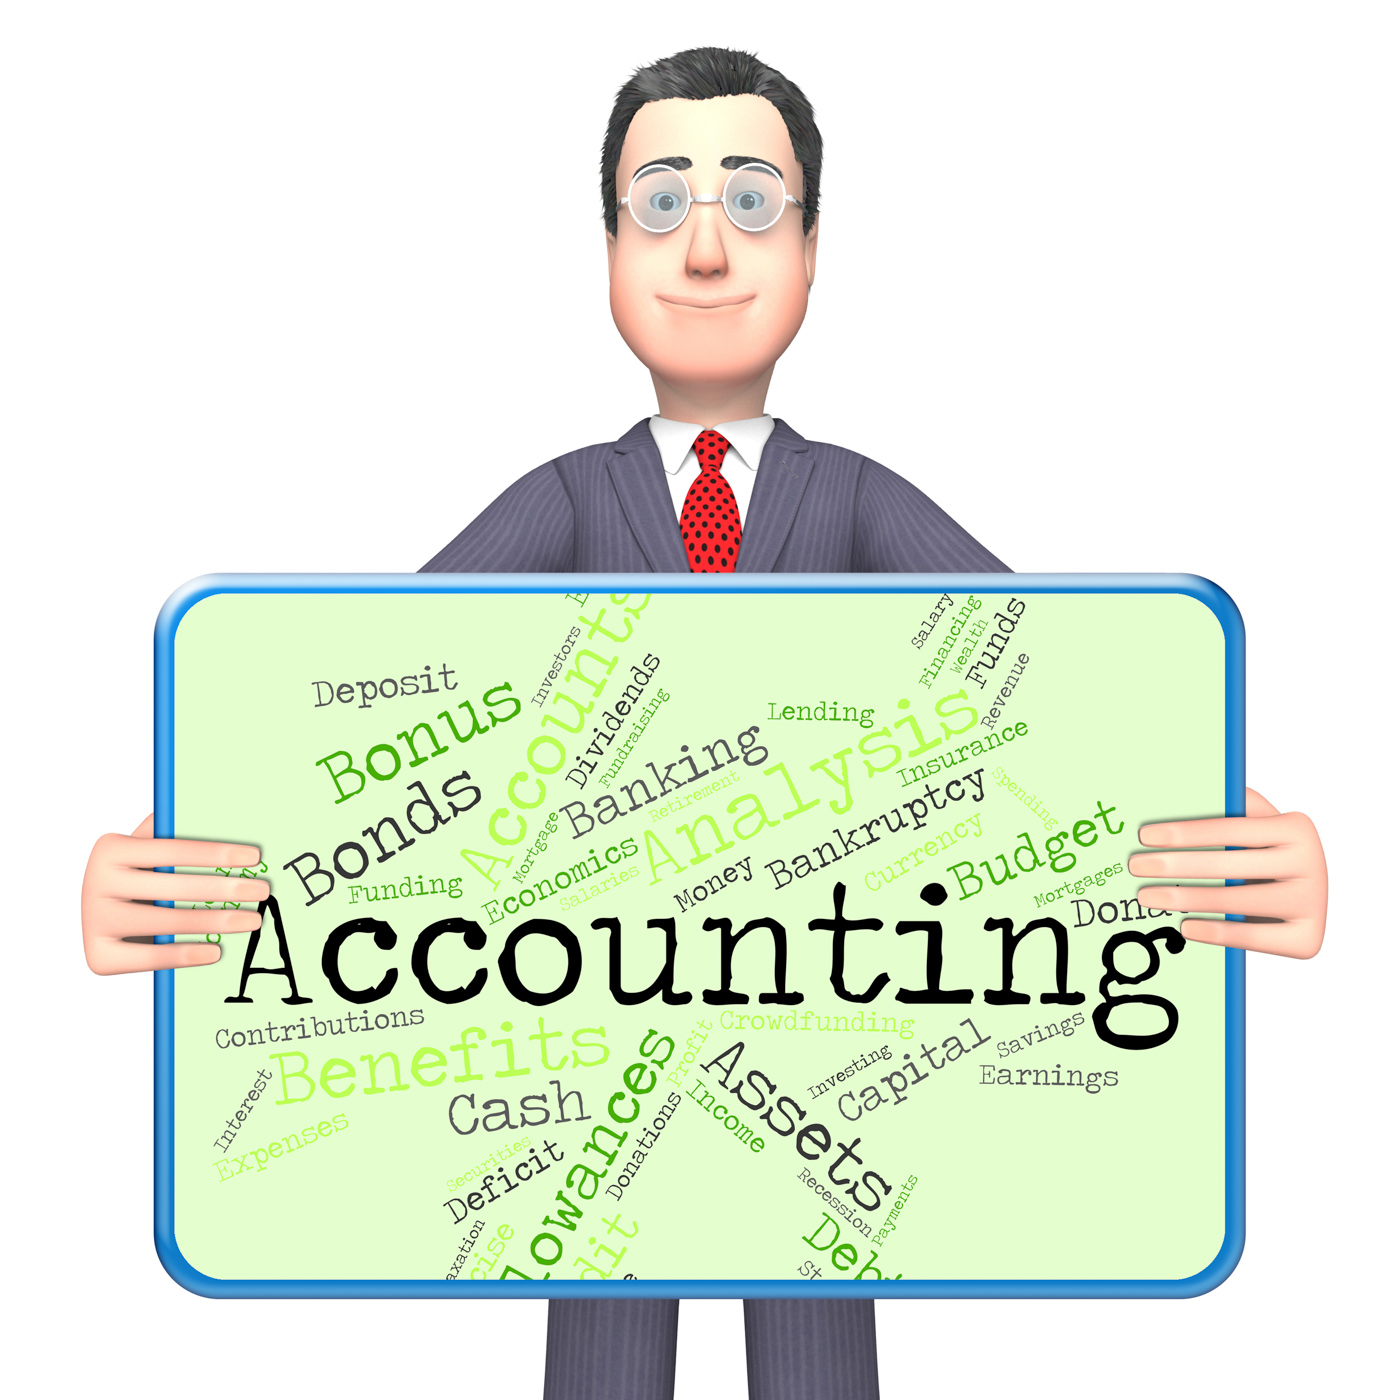 Accounting words indicates balancing the books and accountant photo